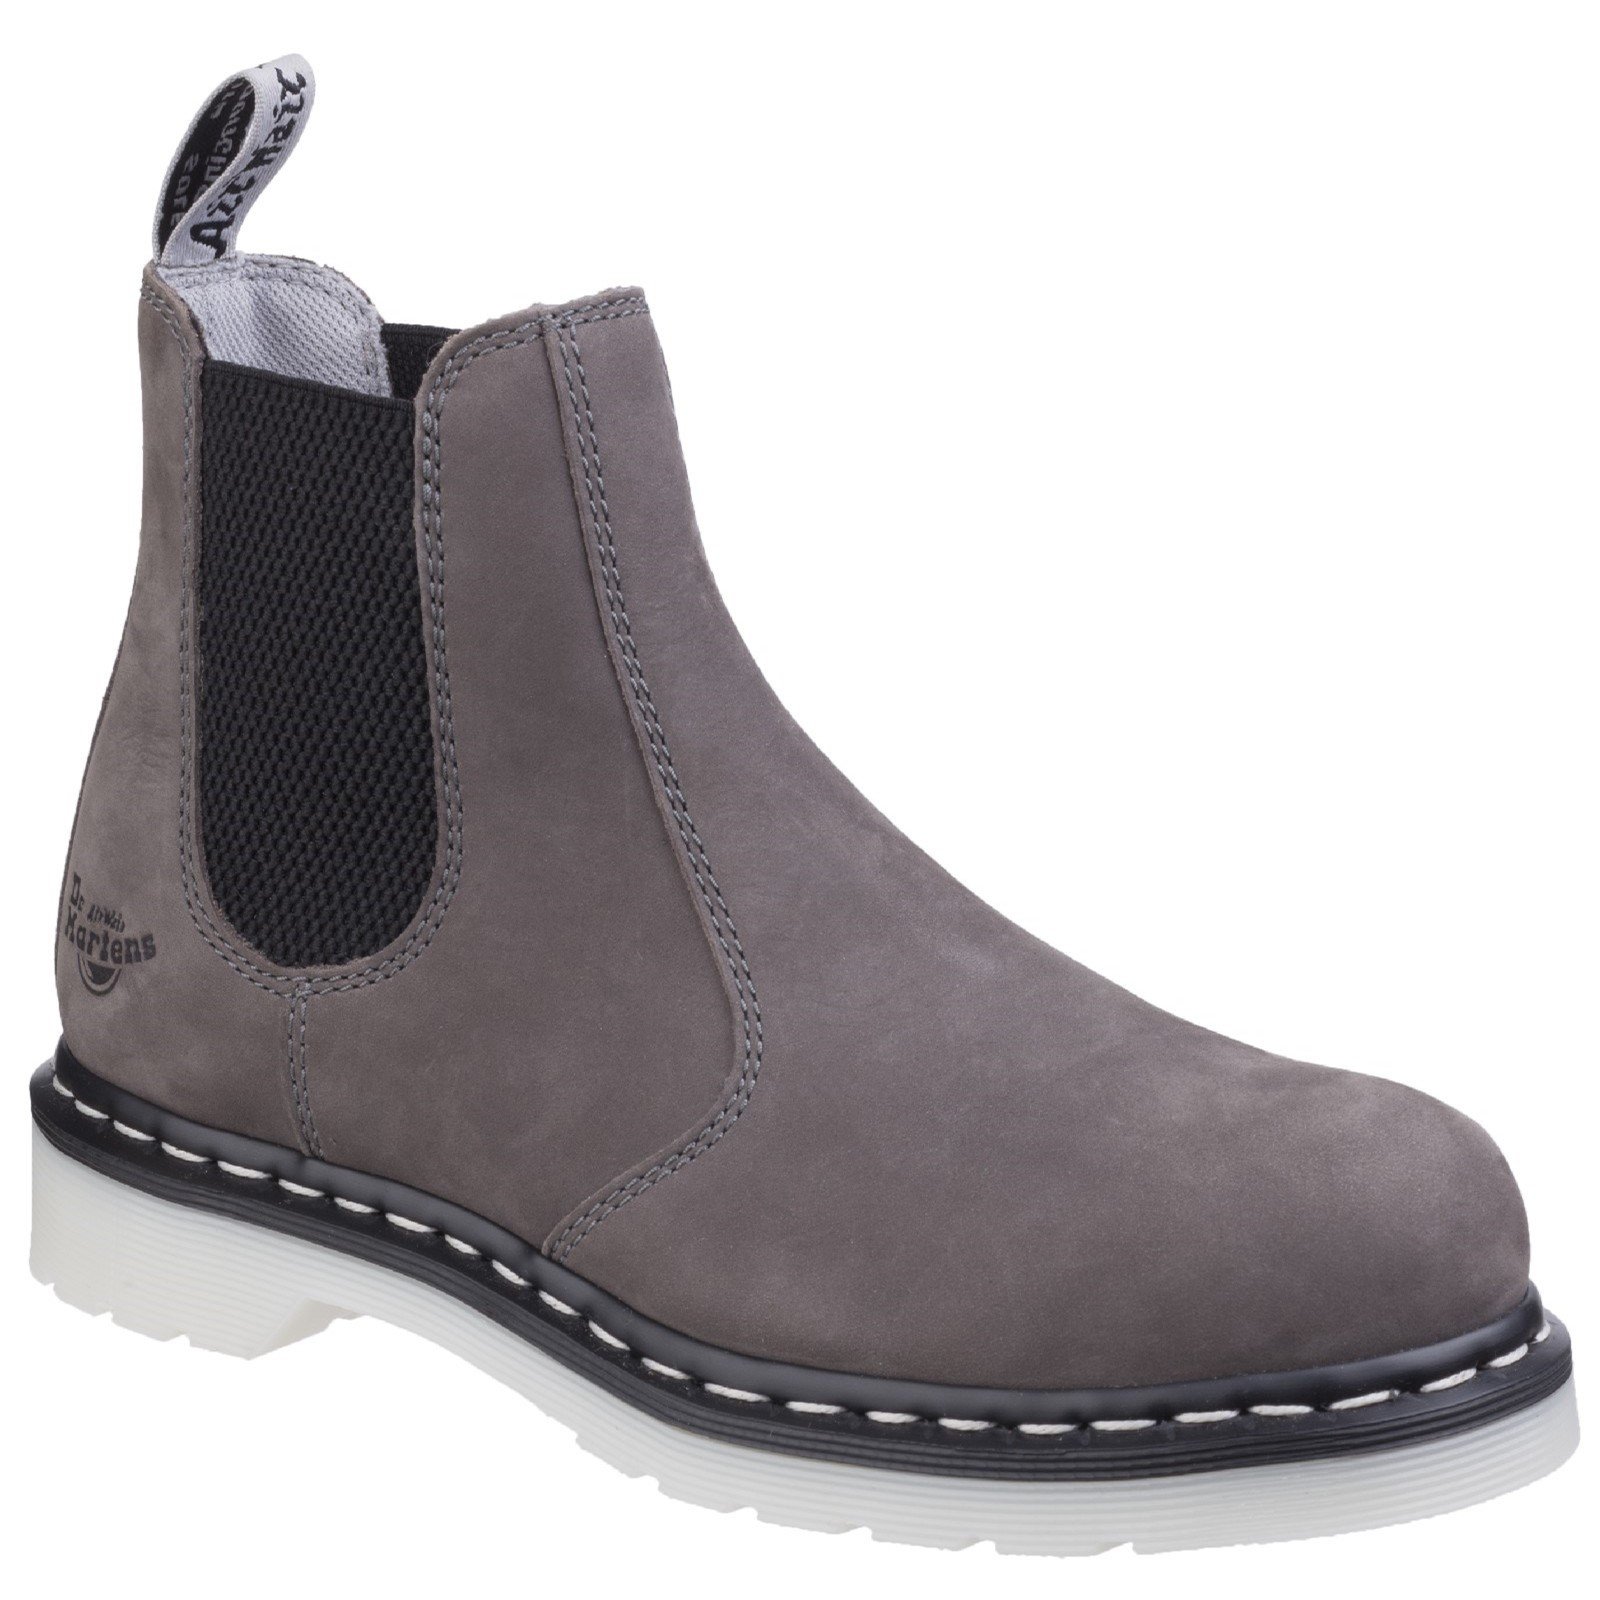 Dr Martens Women's Arbor Elastic Safety Boot Various Colours 29517 - Grey Wind River 3